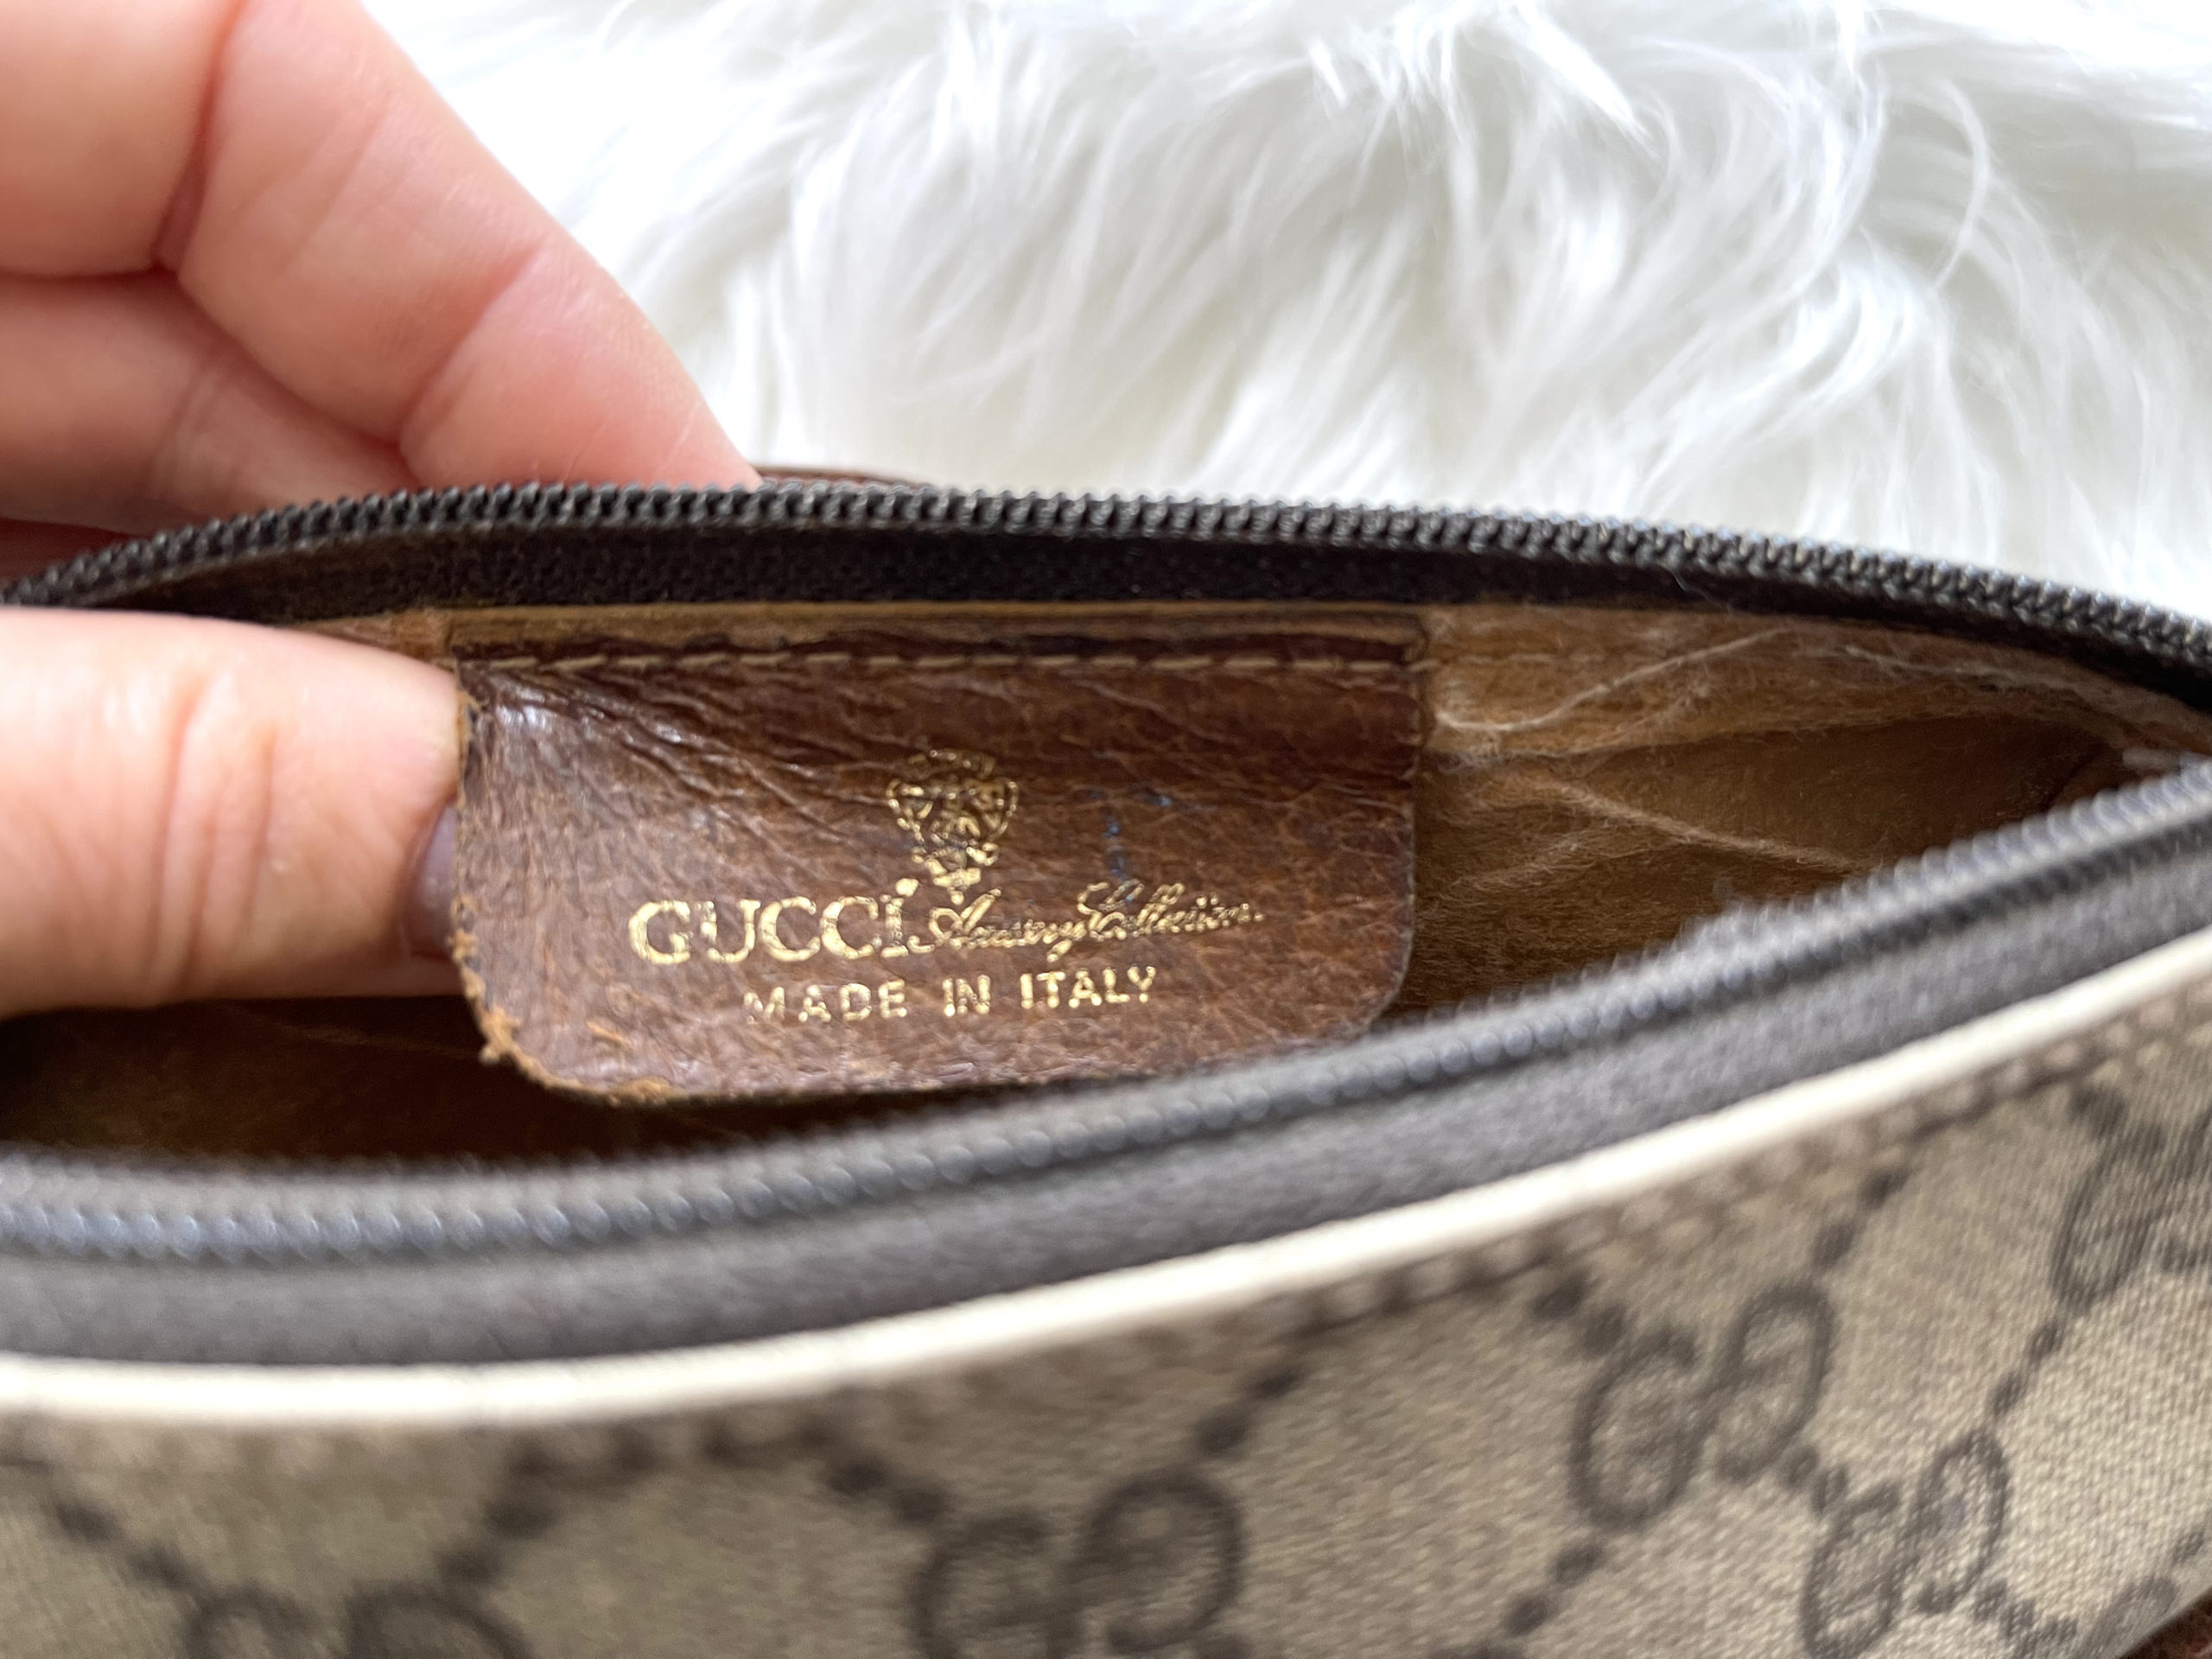 Vintage Gucci Monogram Sling Bag Made In Italy